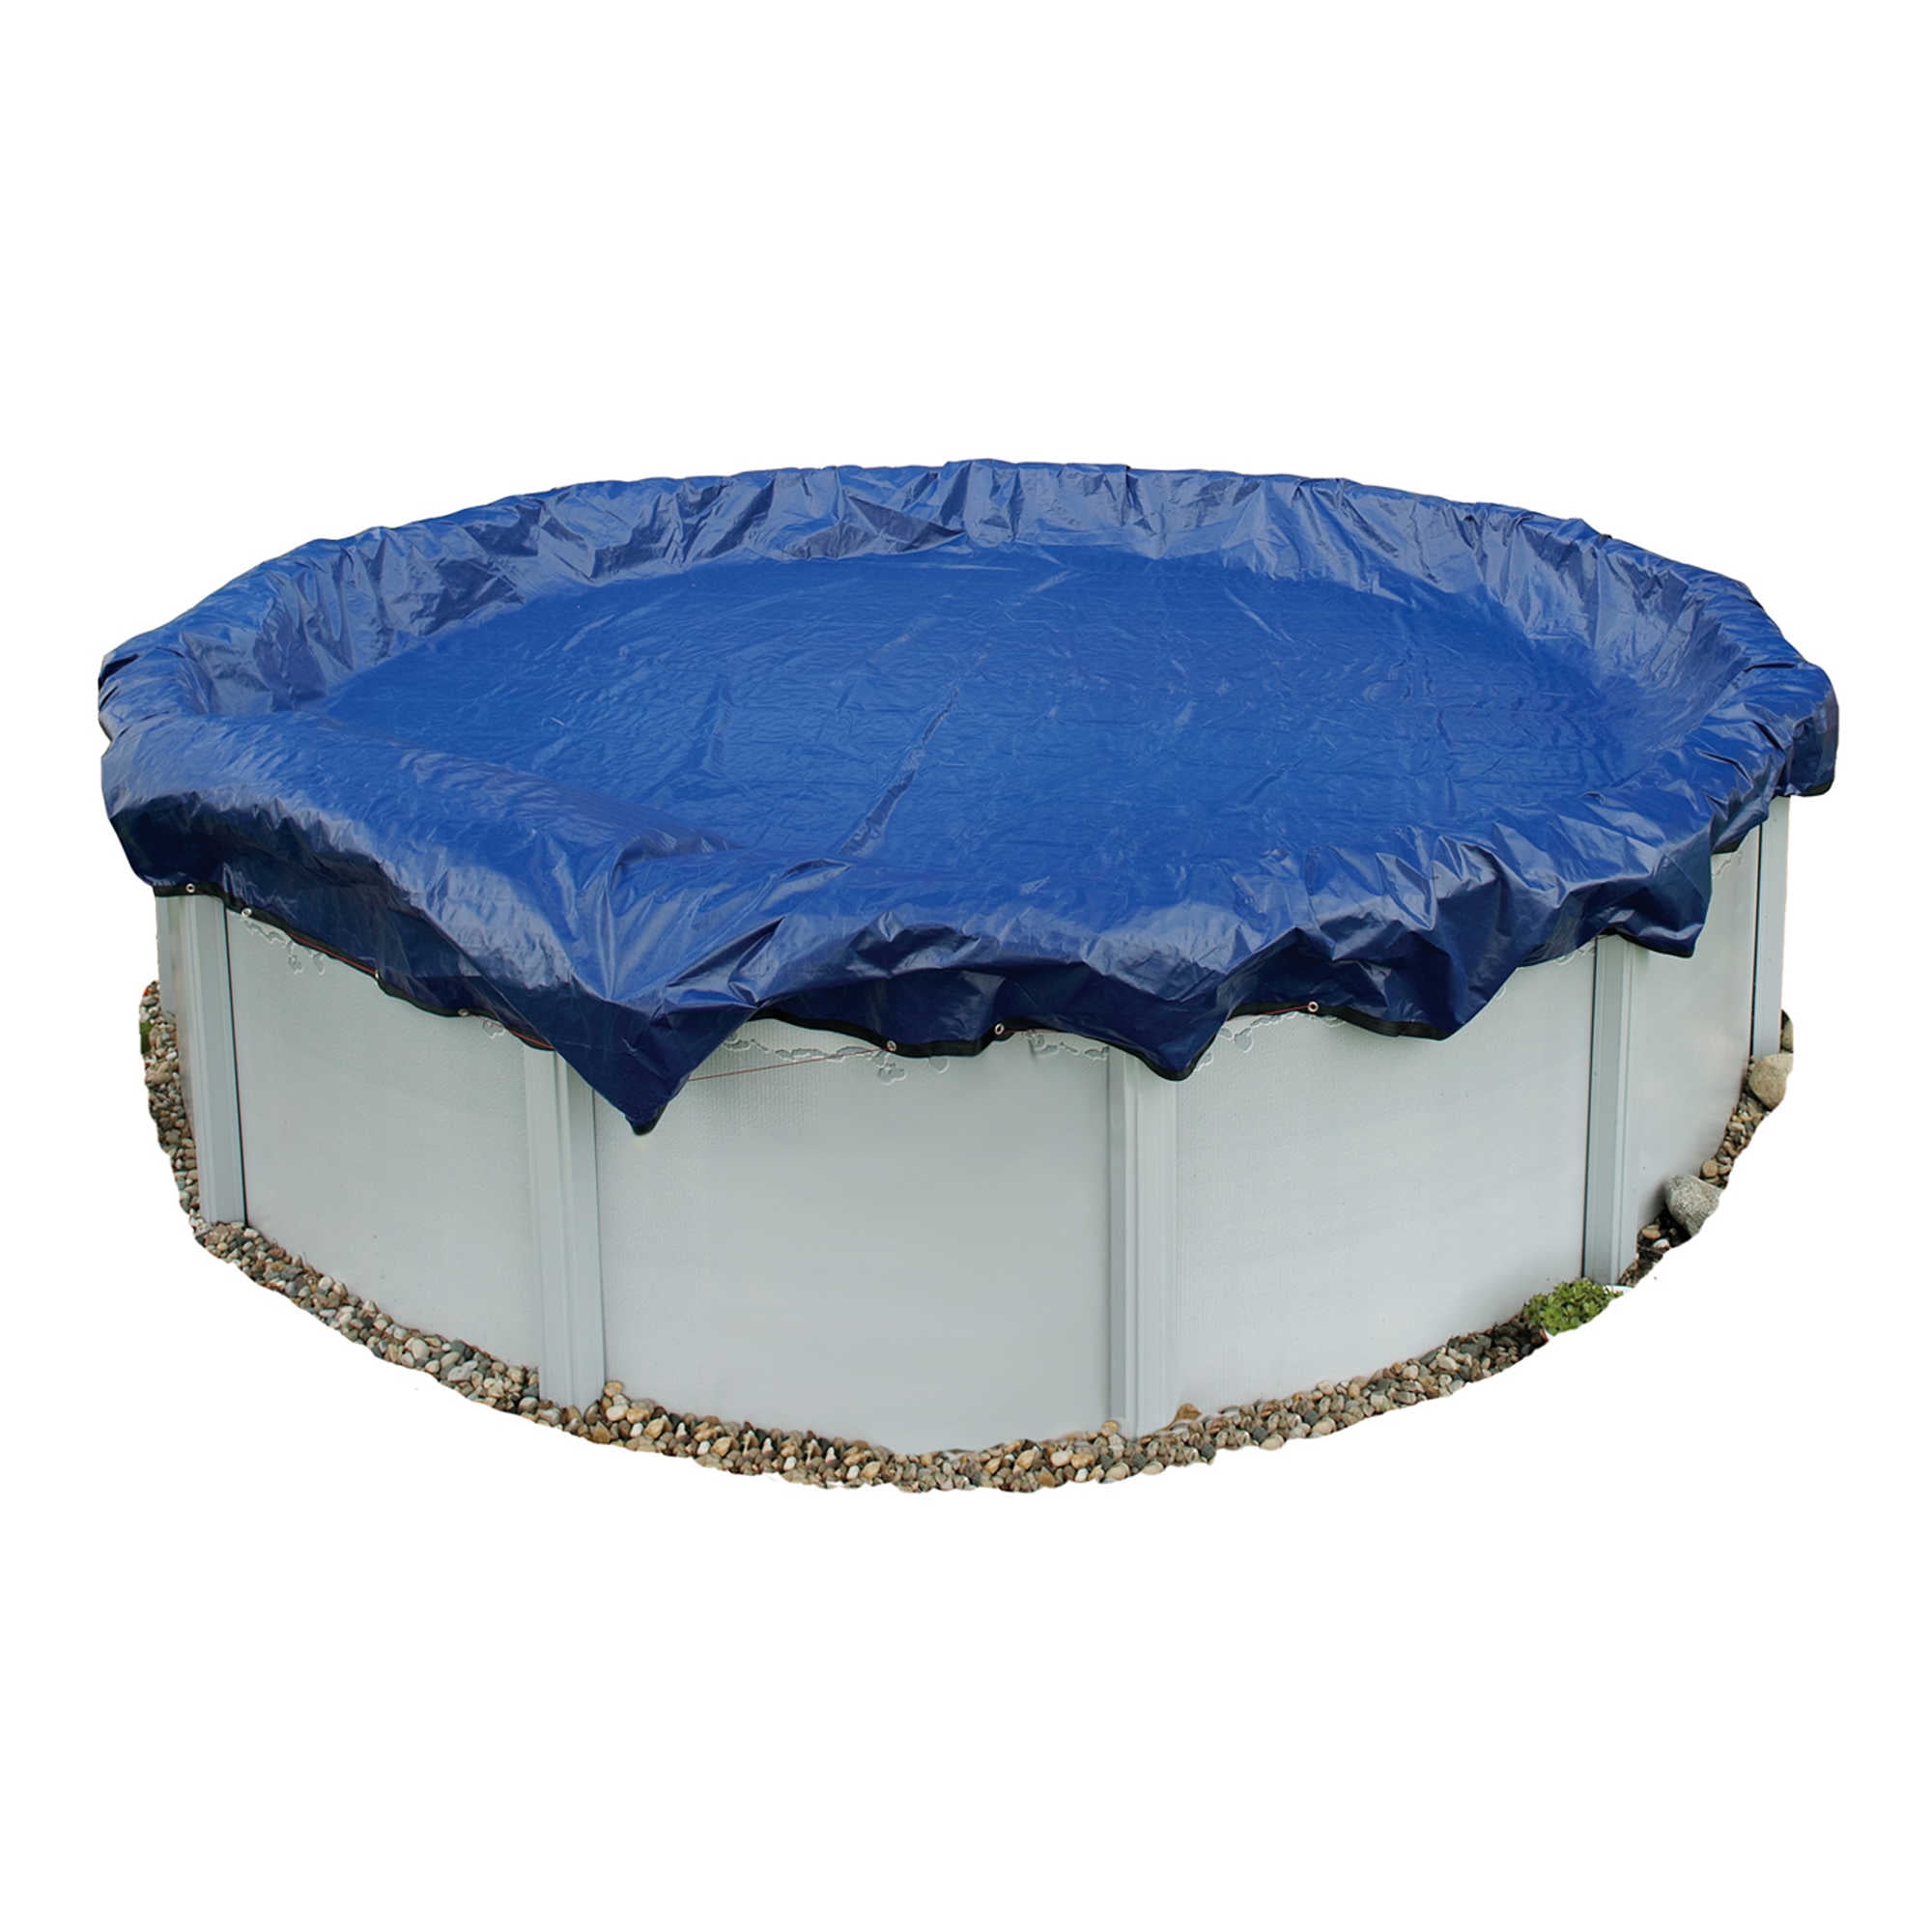 NEW Blue Wave WC713-4 Above-Ground 8 Year Winter Cover For 33' Round Pool 